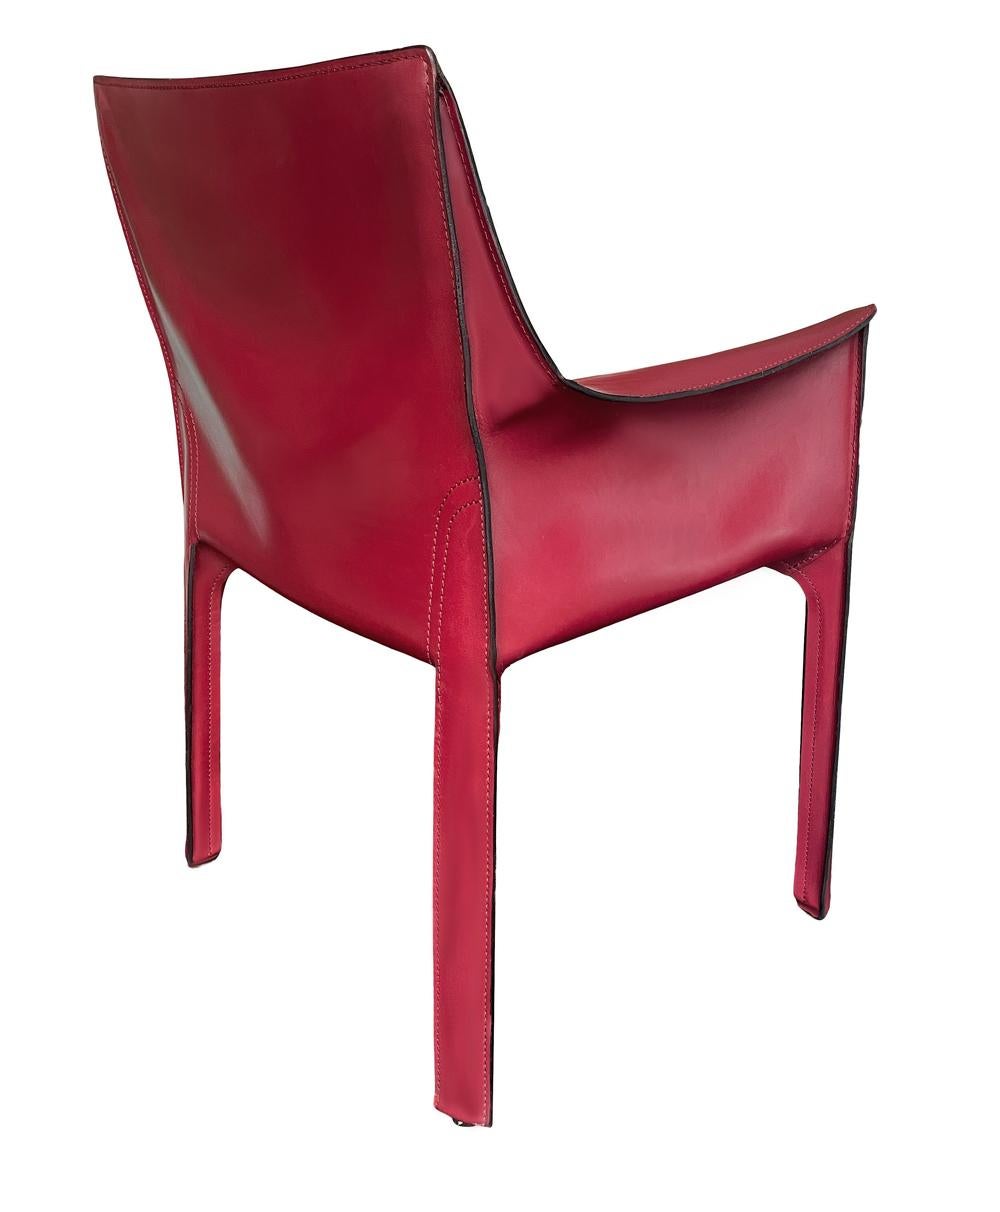 Mid-Century Modern Set of Four Italian Cab Armchairs or Dining Chairs by Mario Bellini Red Leather